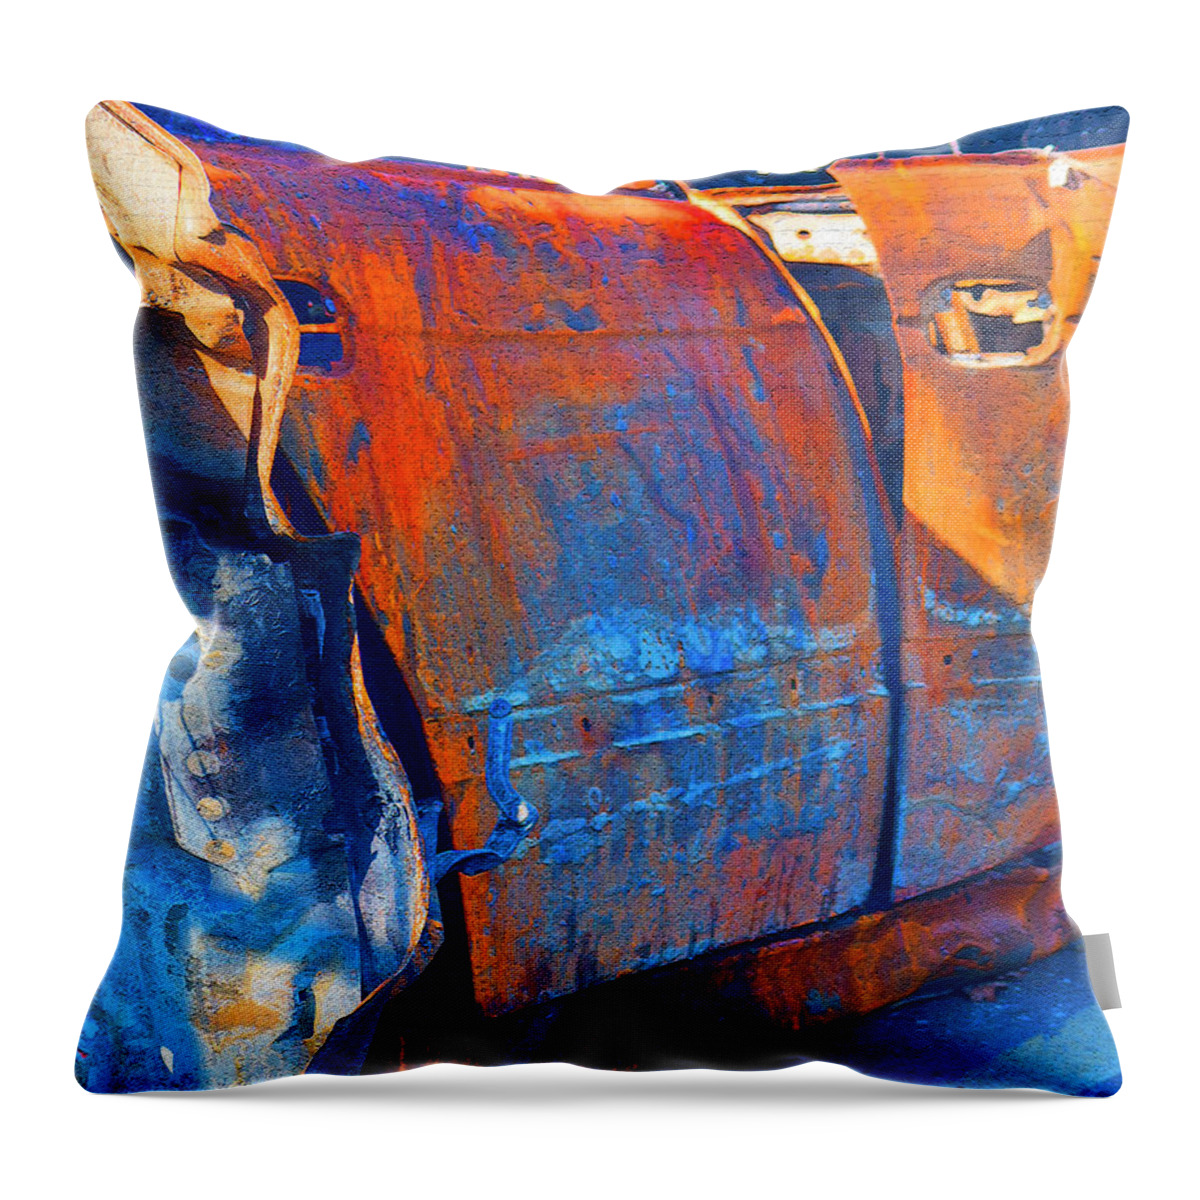 Rust Scapes #2 Throw Pillow featuring the photograph Rust Scapes #2 by Jessica Levant